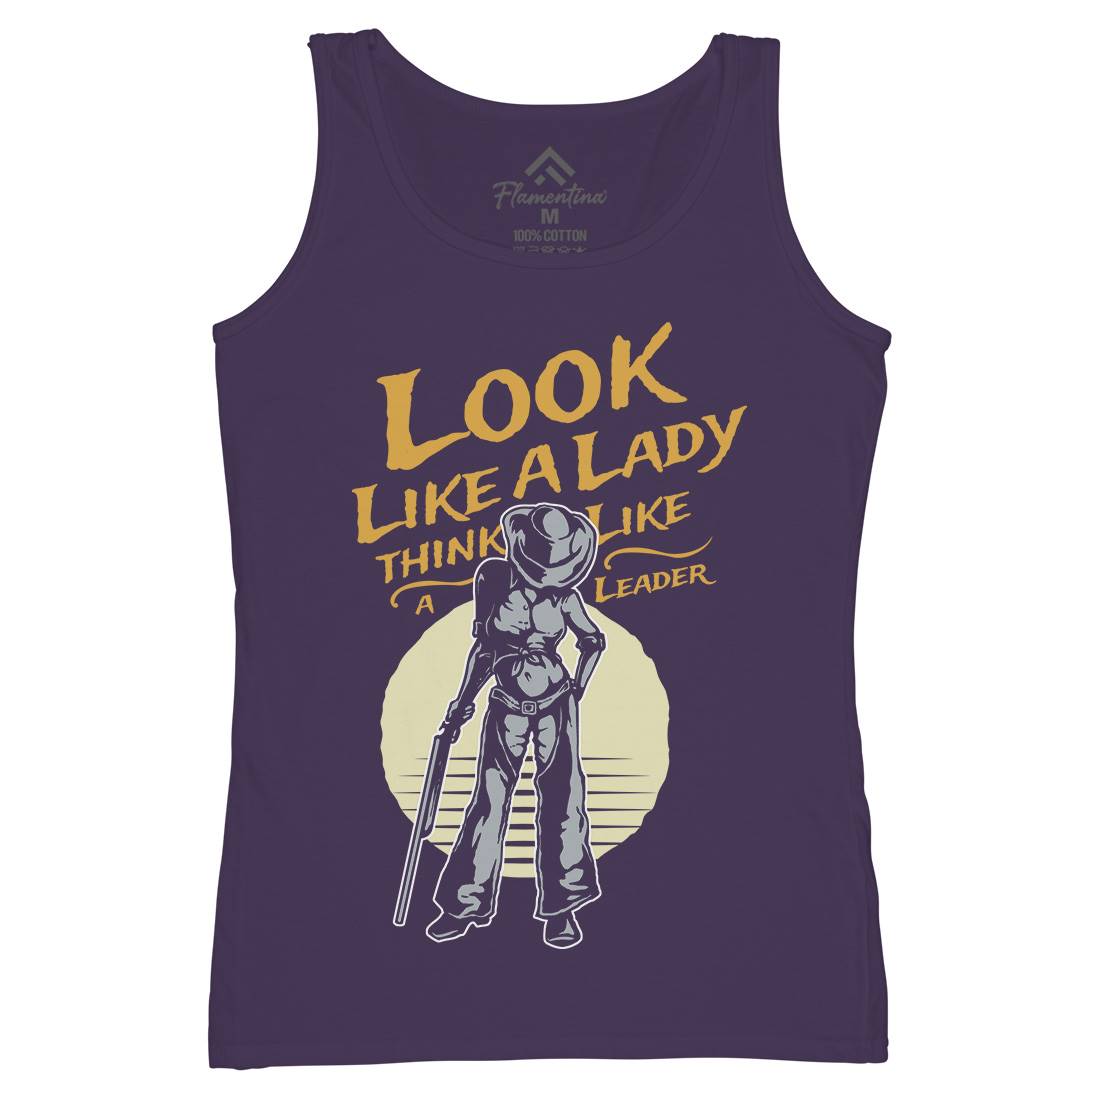 Lady Of Gun Womens Organic Tank Top Vest Quotes A334